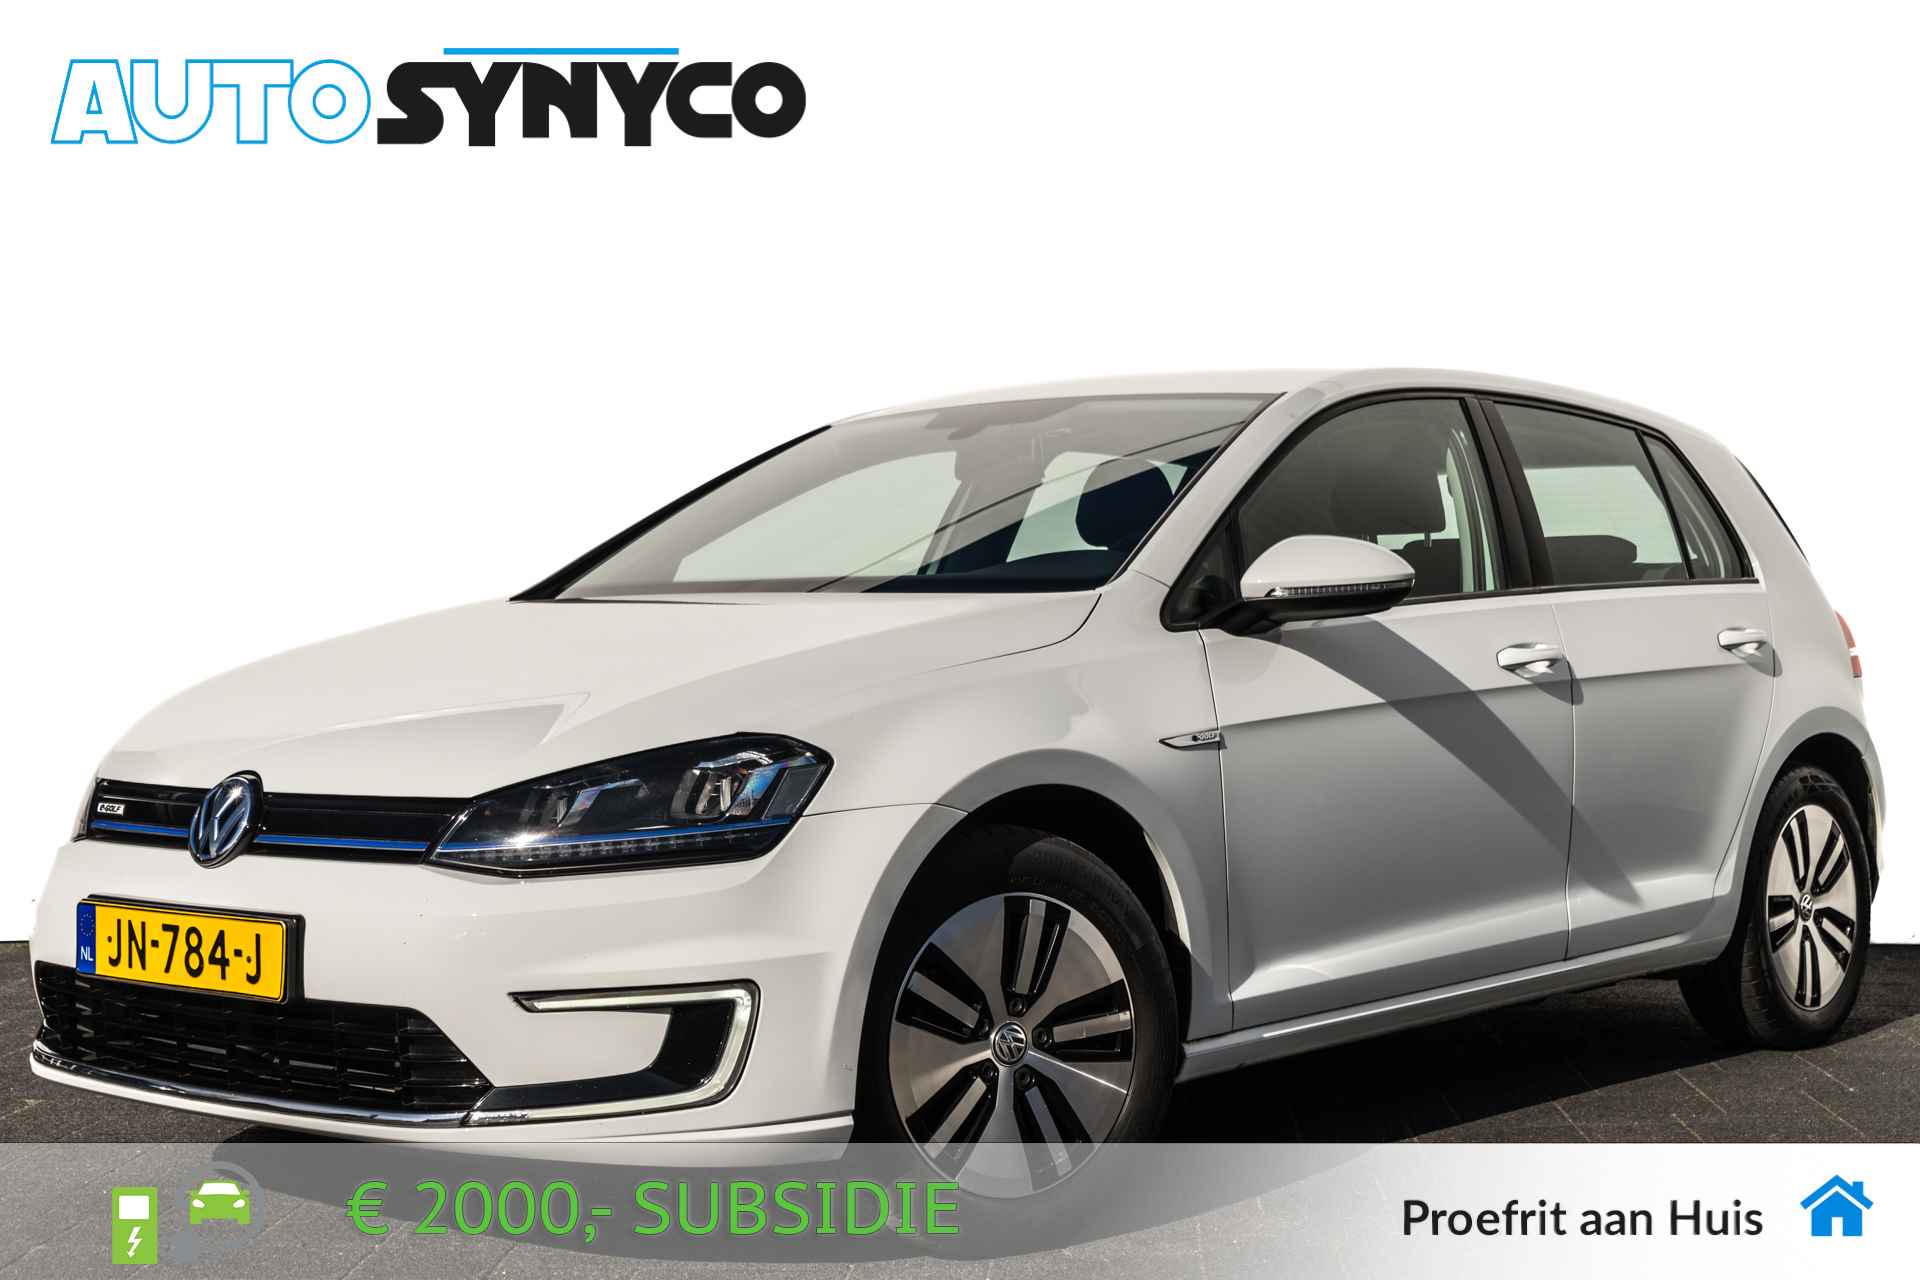 Volkswagen Golf e-Golf 24 Kwh | LED | 2.000,- Subsidie | Navigatie | Climate Control - 1/36